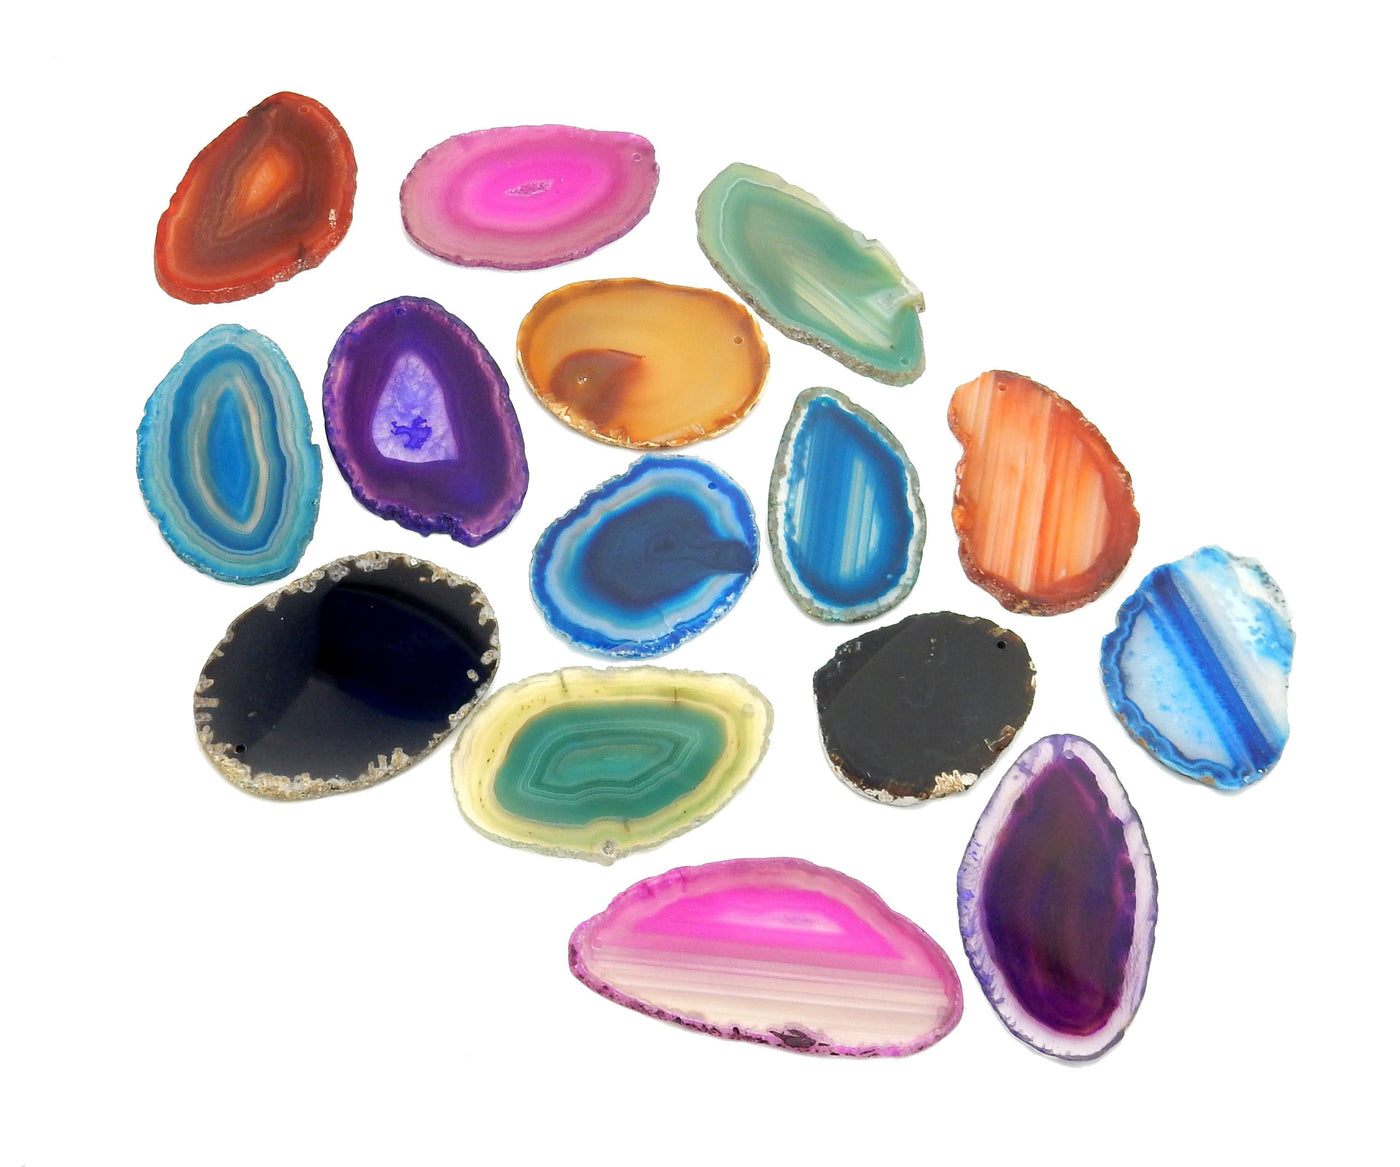 Assorted Drilled Agate Slices By Color on White Background.